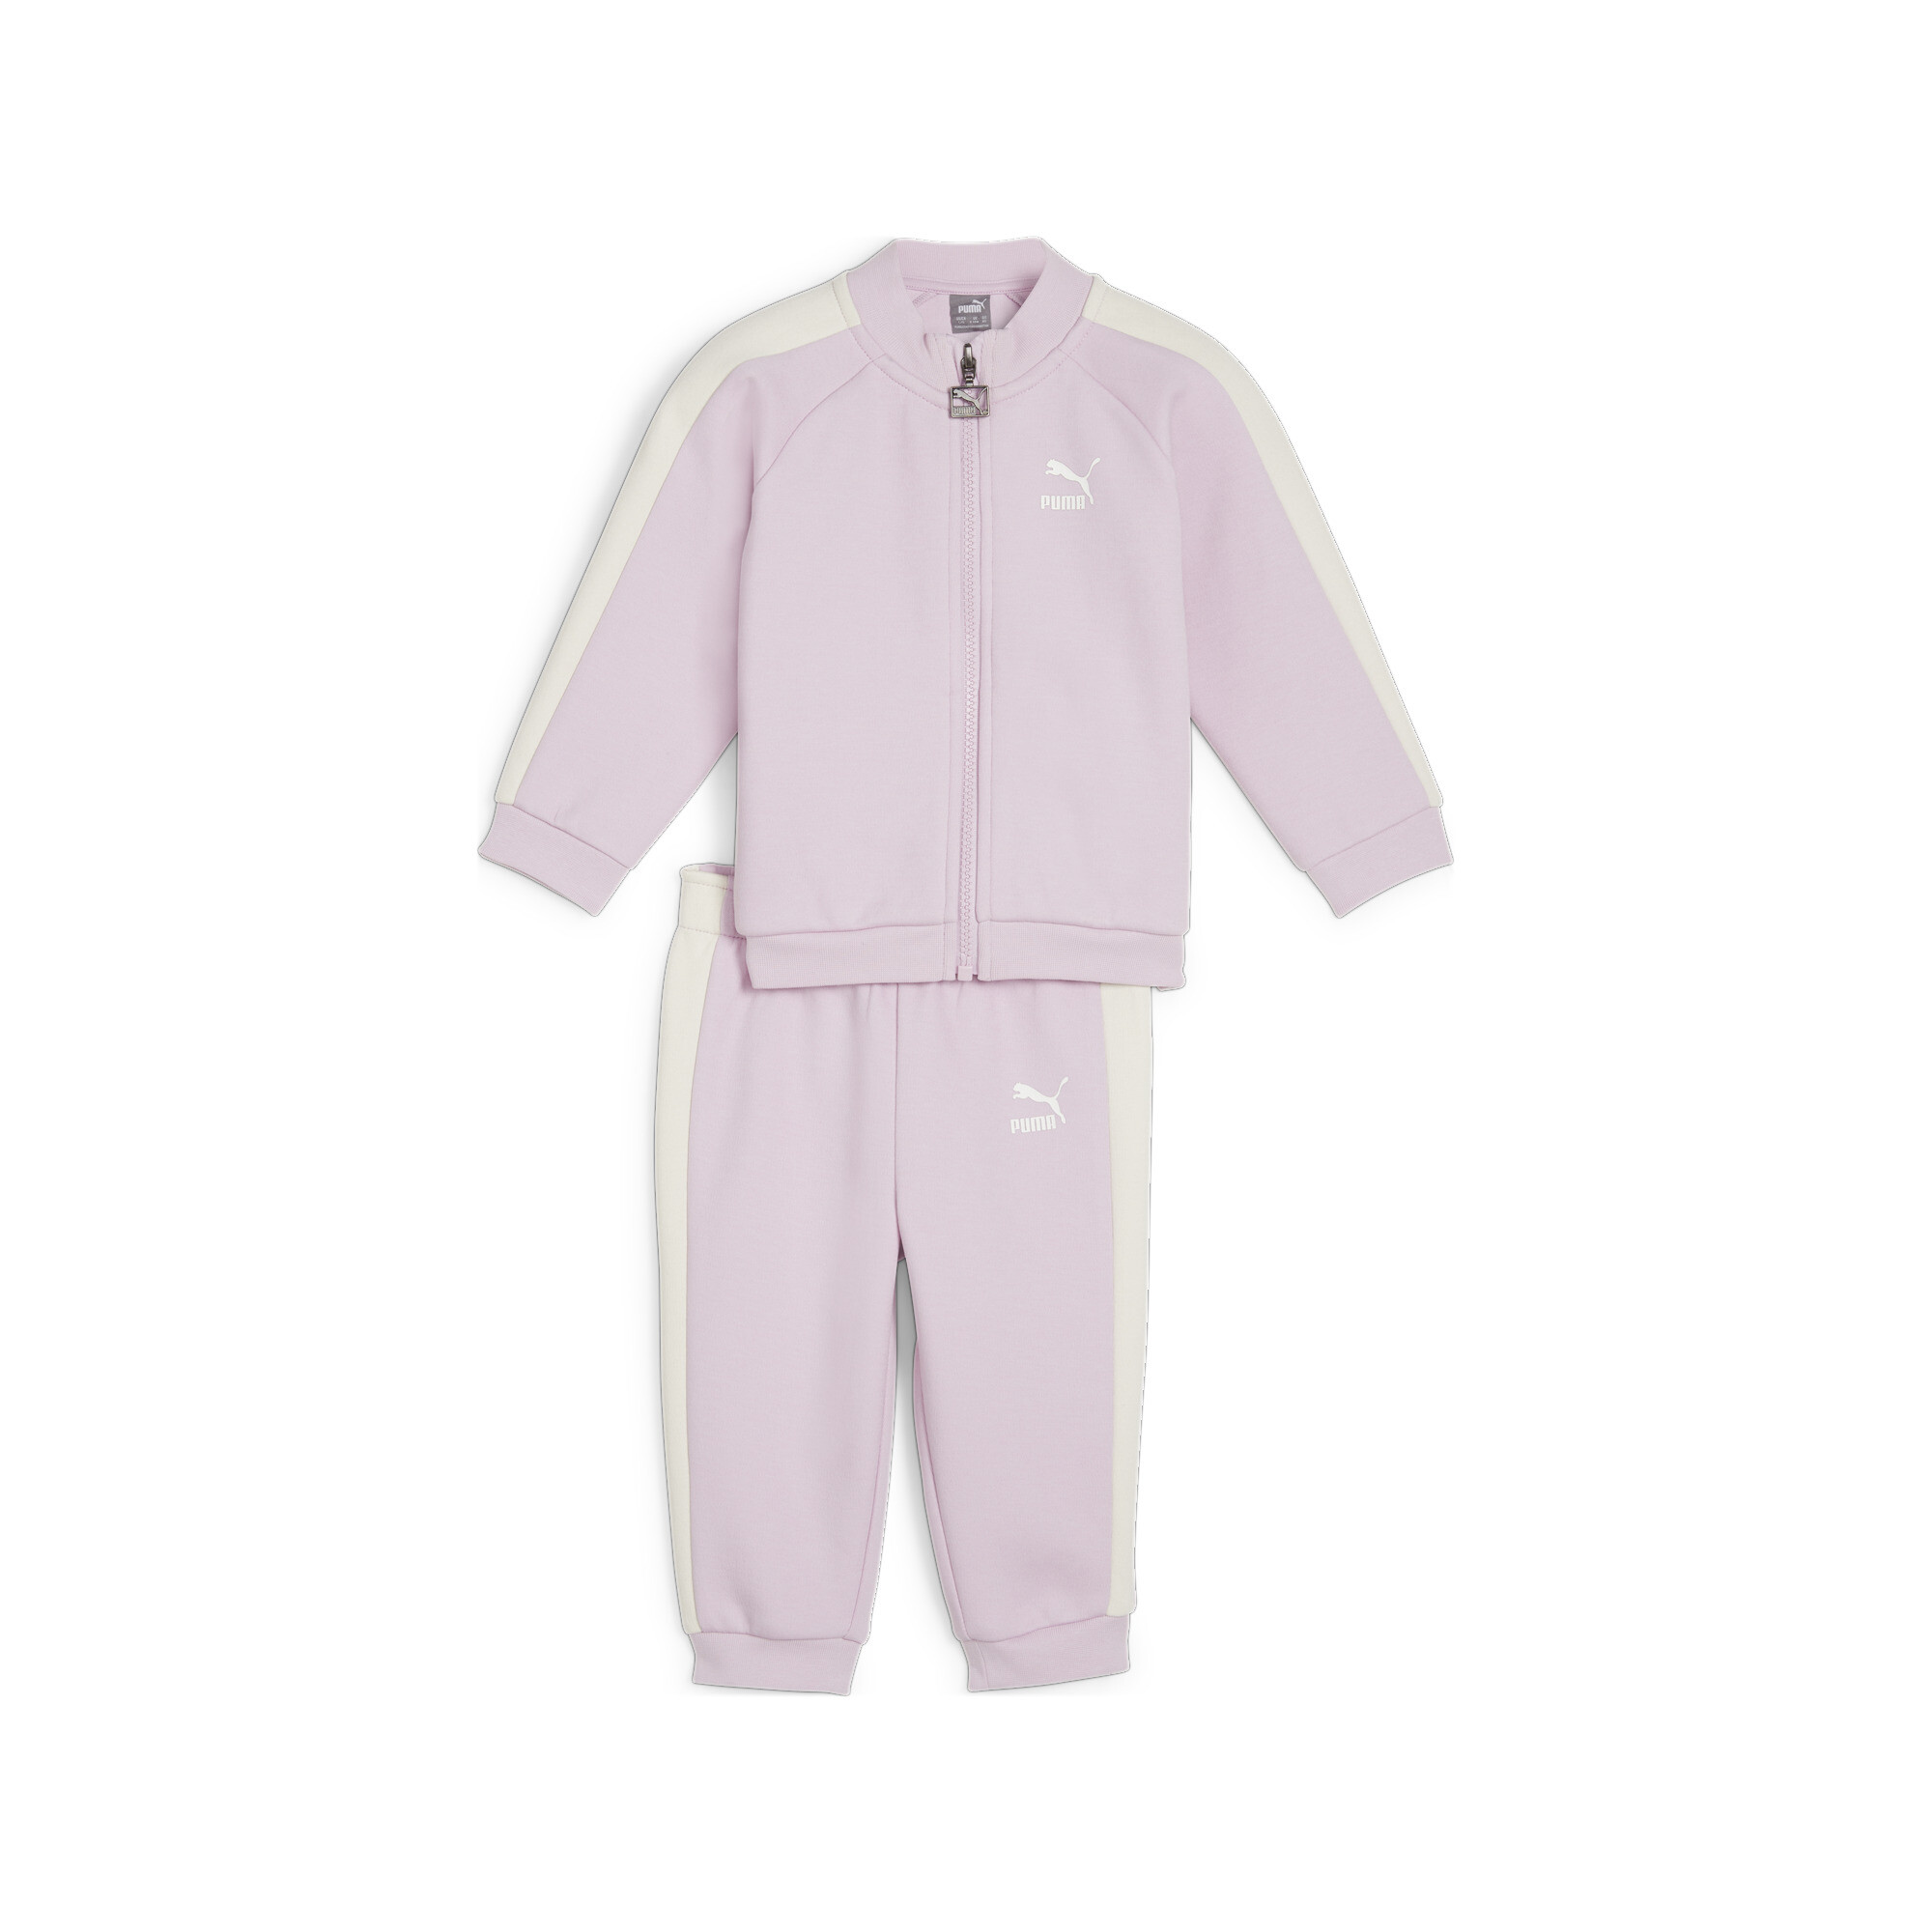 Kids' PUMA MINICATS T7 ICONIC Baby Tracksuit Set In 90 - Purple, Size 6-9 Months